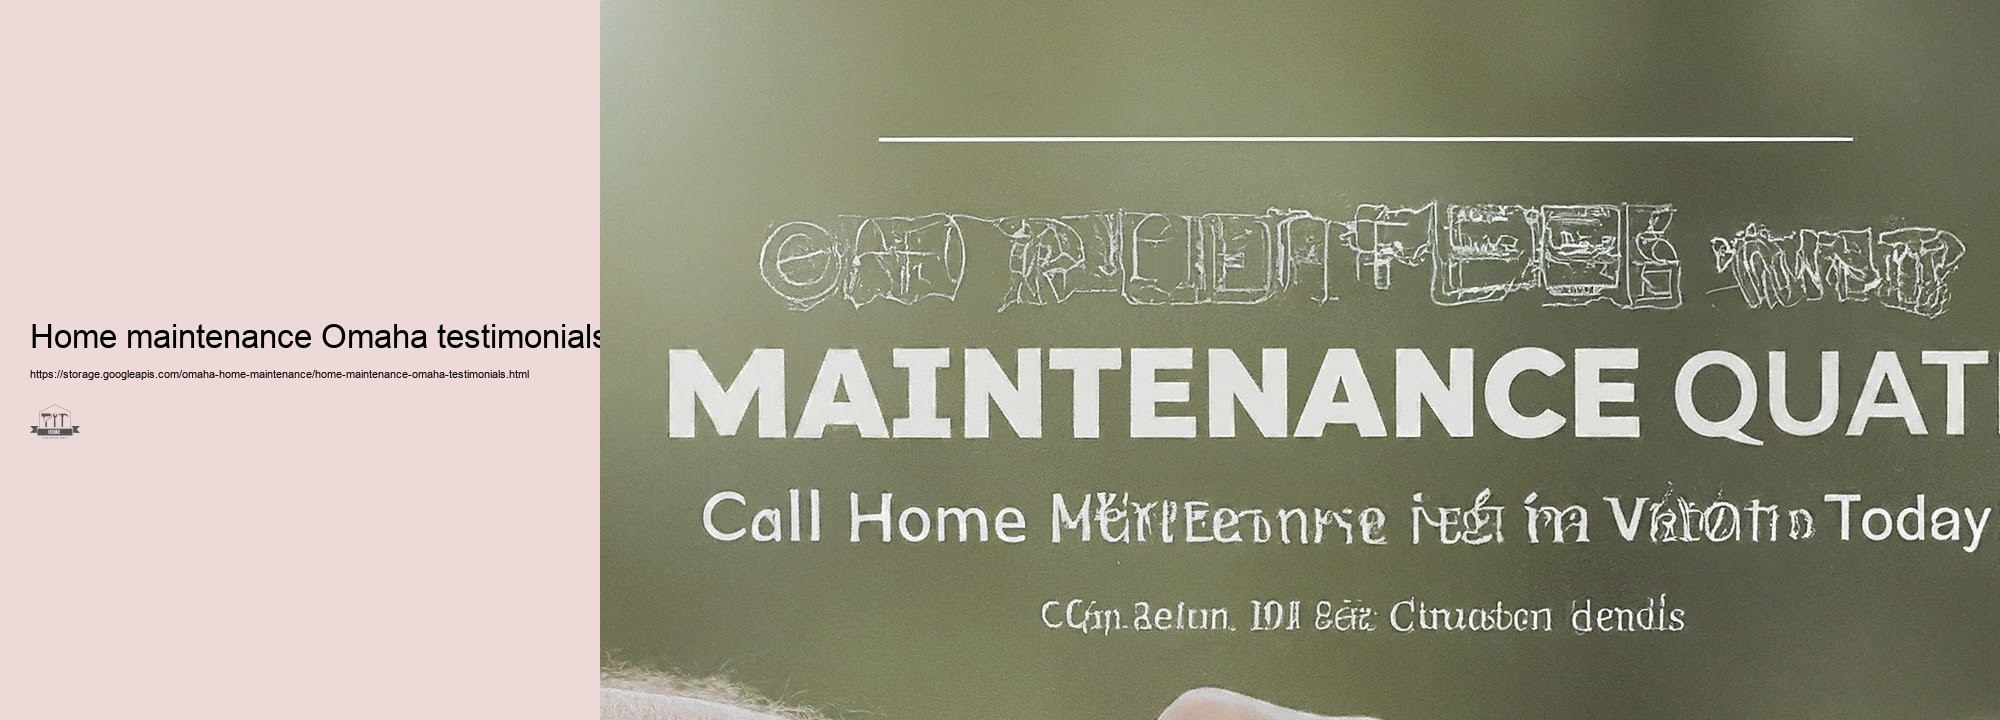 Important Home Maintenance Tips for Omaha Homeowners